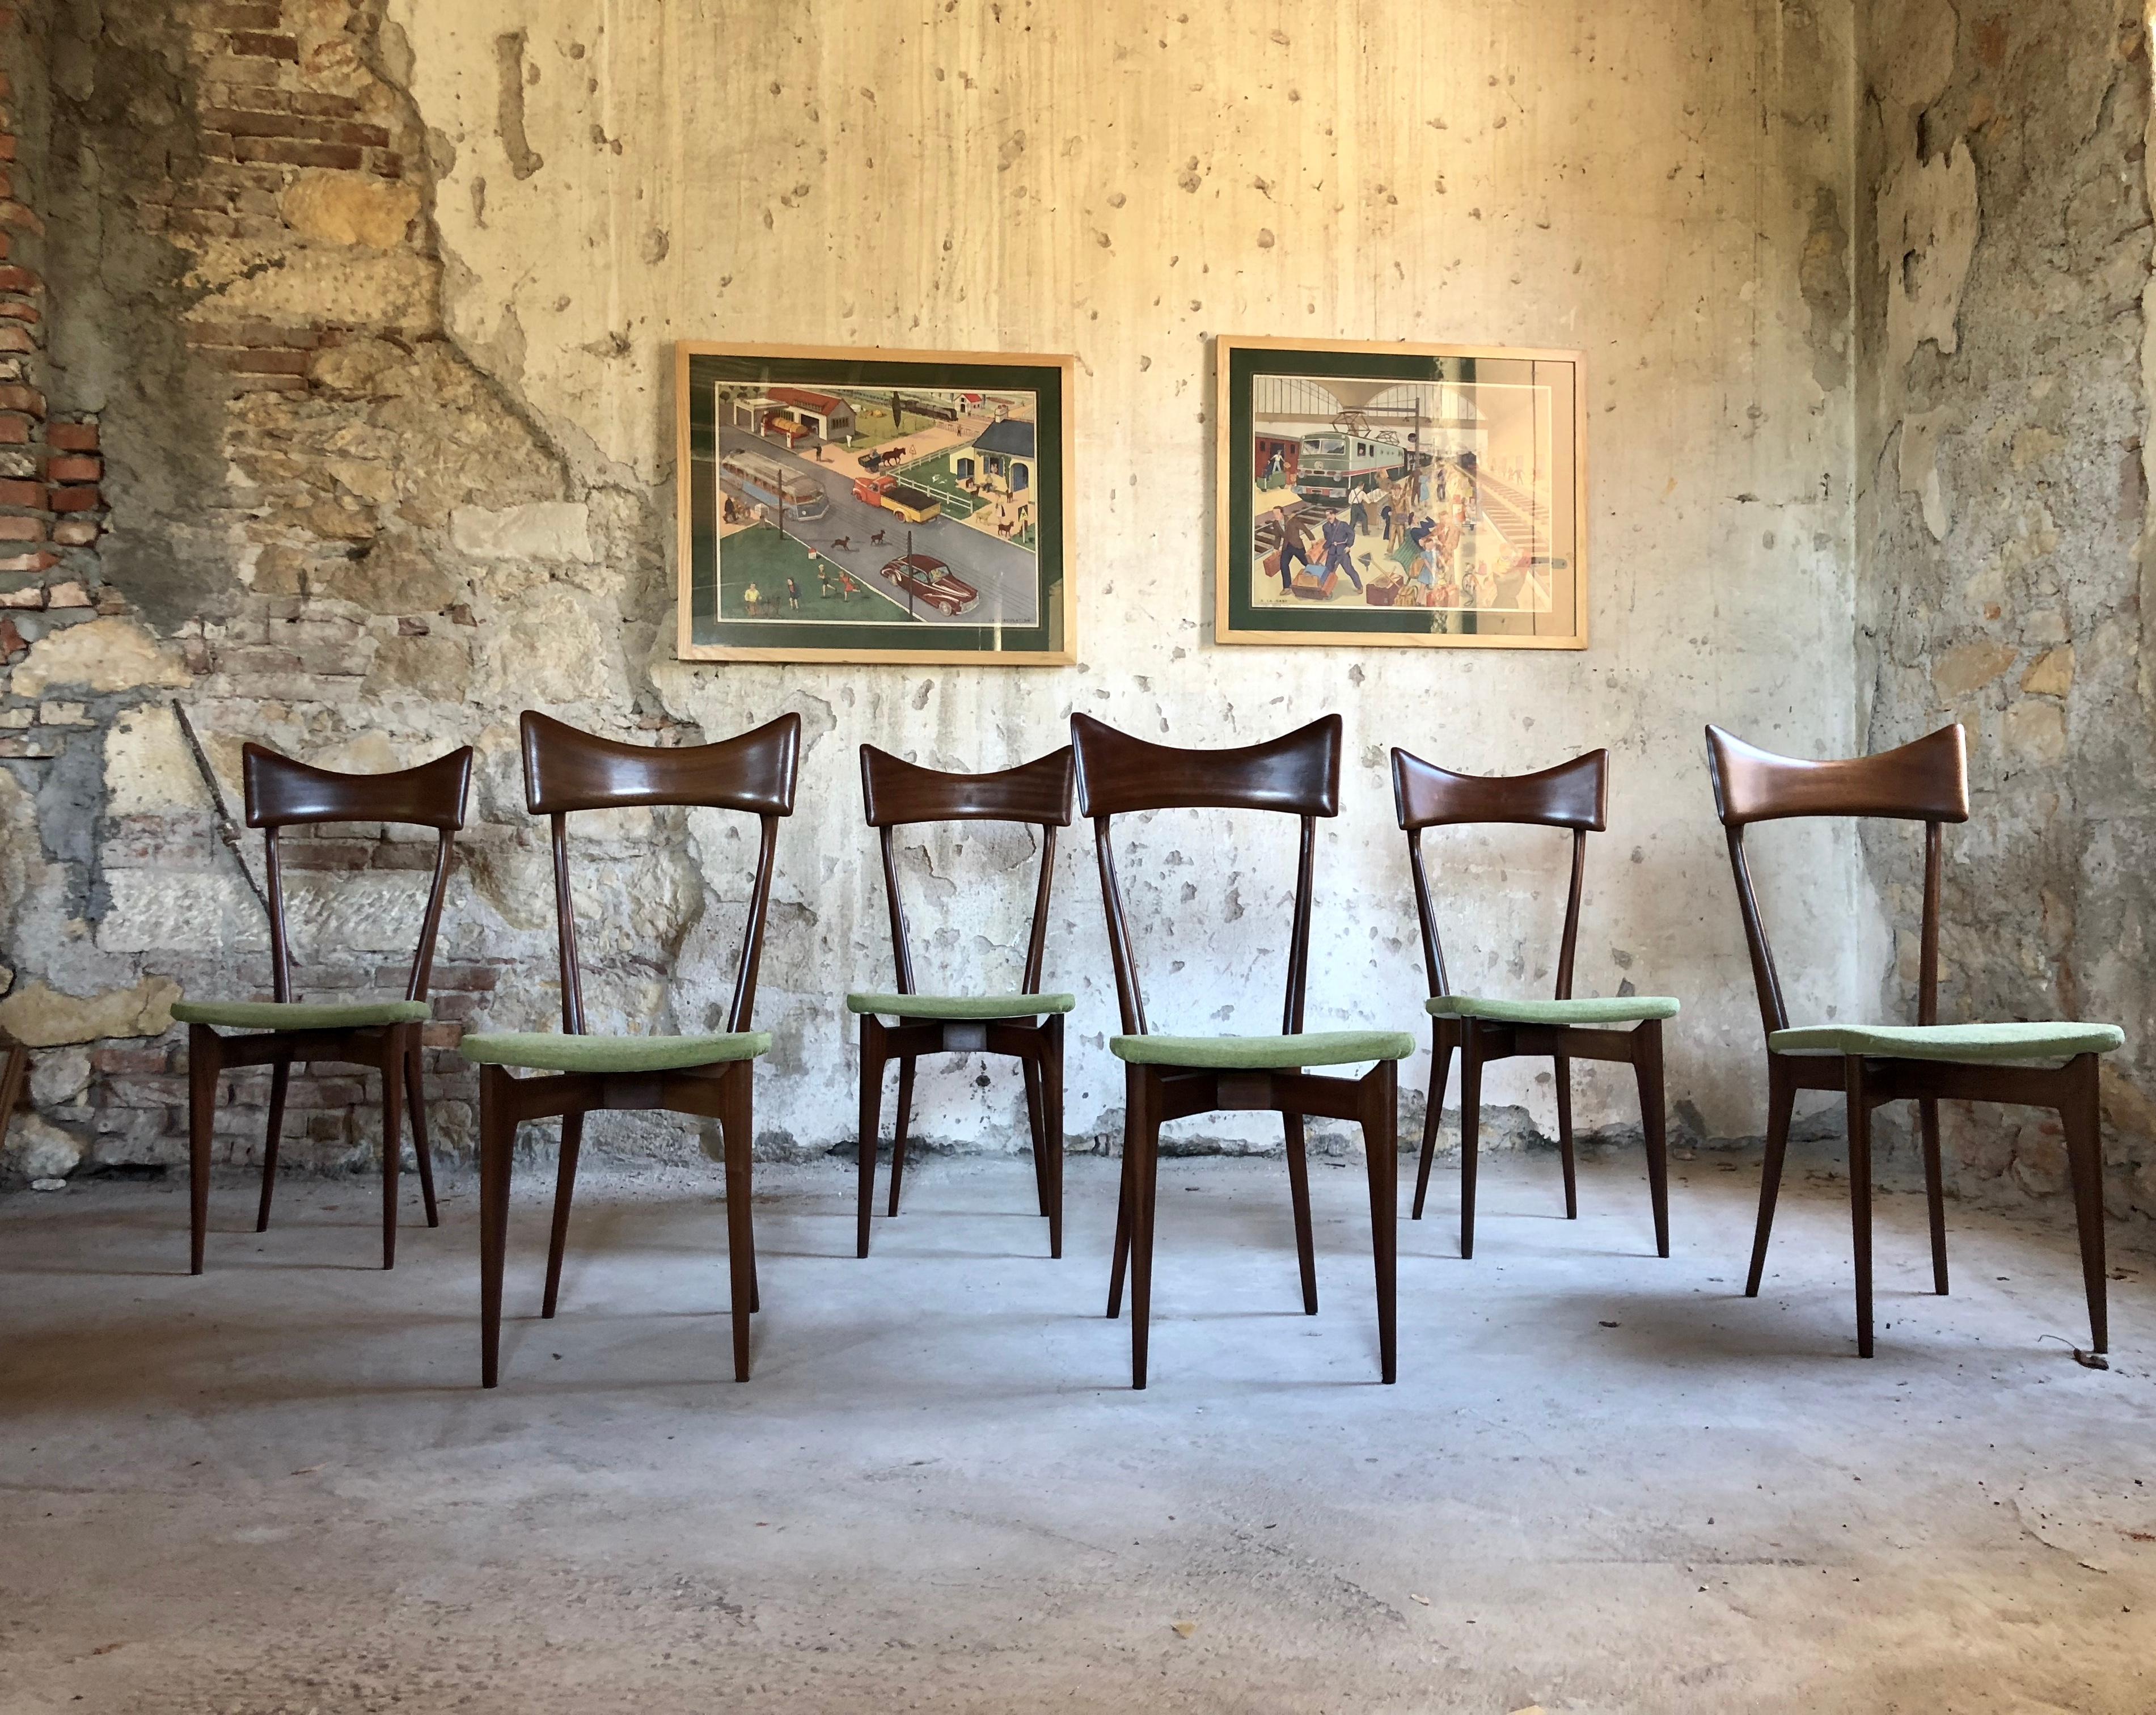 Ico Parisi and Luisa Parisi dining chairs for Ariberto Colombo, 1948, set of 6

Set of six chairs designed by Ico Parisi, circa 1945.
Produced by Ariberto Colombo in Cantù, Italy, in the 1948.
The chairs are in very good condition, recently restored